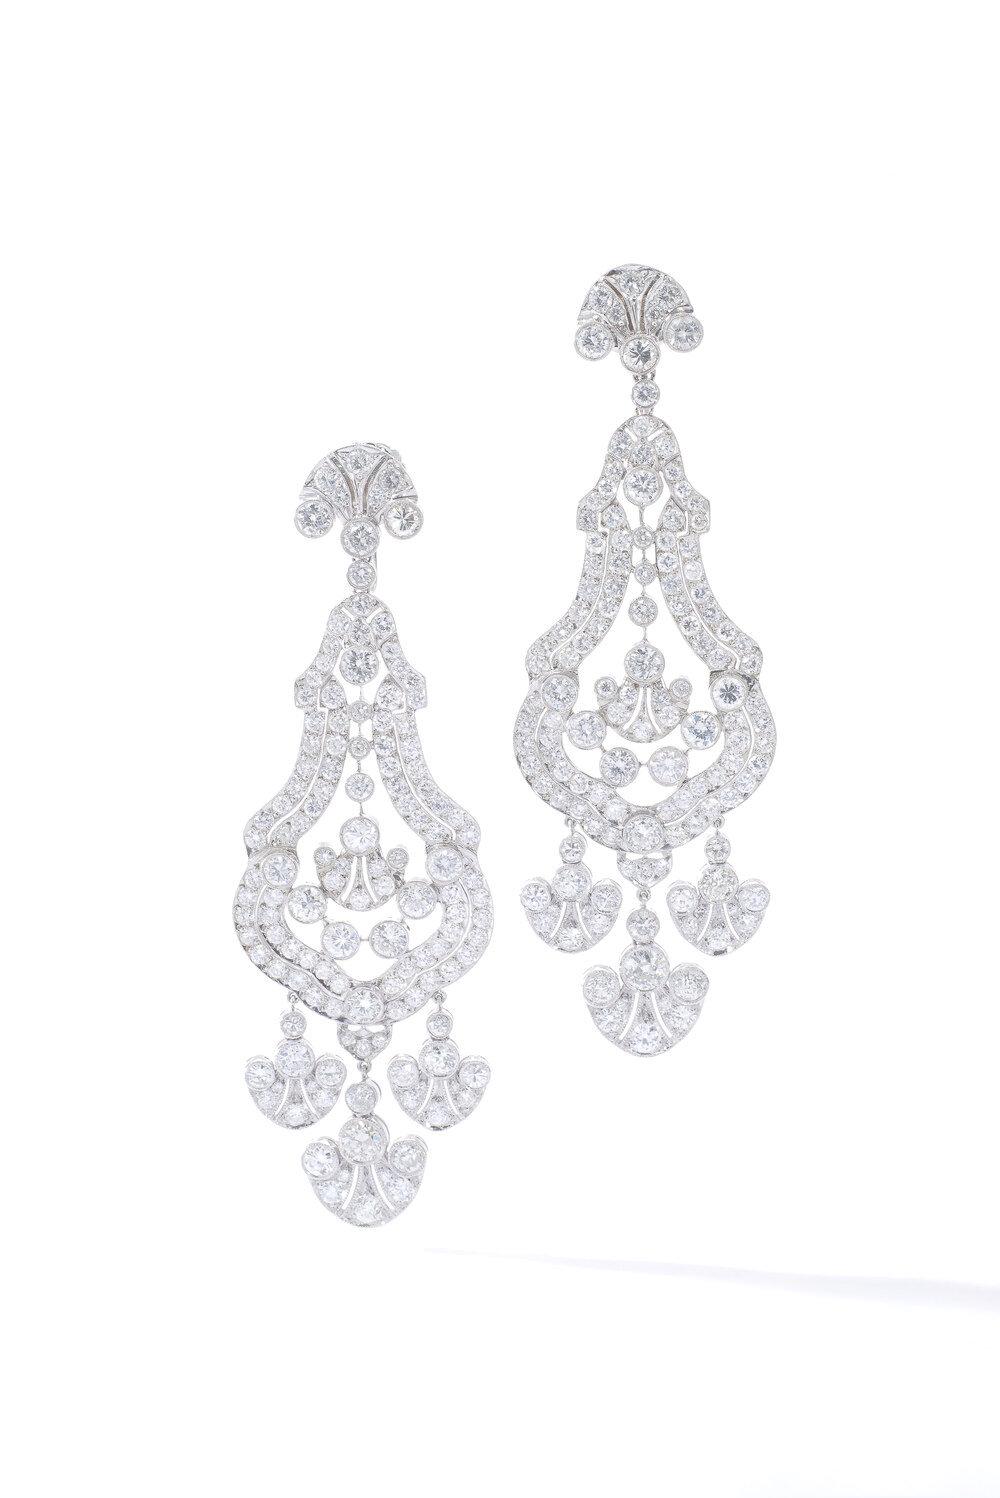 A pair of Diamond and Platinum Earrings. 
Old European and 8/8 cut diamonds: approximately 8.00-10.00 carats.
Length: 8.00 centimeters.

Some treasures never lose their luster. Enter the Antique Diamond and Platinum Ear Pendants, a dazzling revival